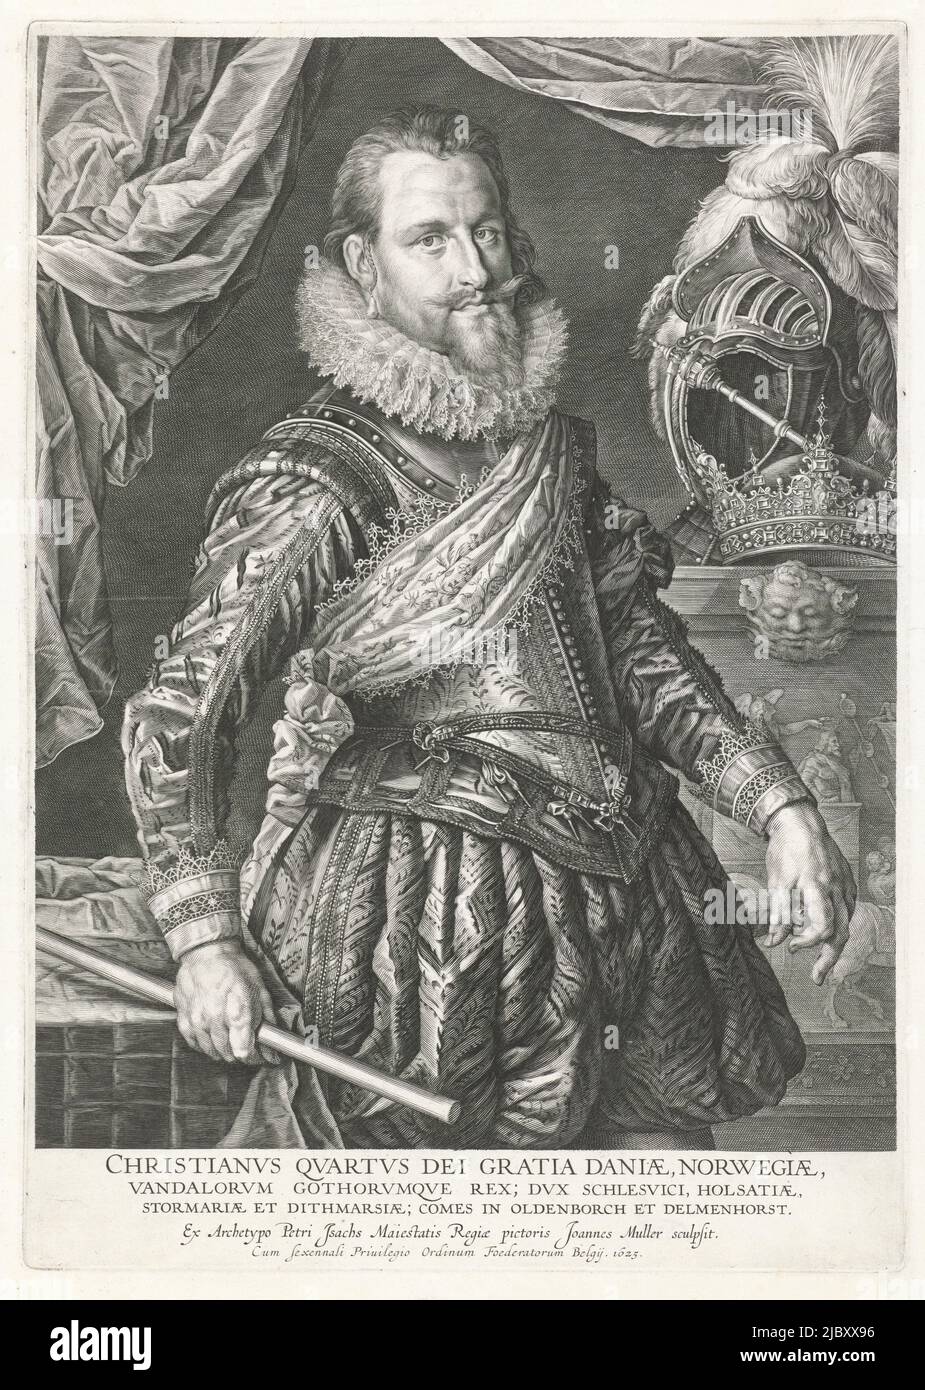 Portrait of Christian IV, King of Denmark and Norway, wearing a sash over his shoulder and holding a commanding staff, standing under an open curtain. To the right are his helmet, crown and scepter. Below that a relief depicting a king being lauded. Below in the margin his name and titles in Latin., Portrait of King Christian IV of Denmark and Norway, print maker: Jan Harmensz. Muller, (mentioned on object), after: Pieter Isaacsz., (mentioned on object), Staten-Generaal, (mentioned on object), Amsterdam, 1625, paper, engraving, h 425 mm × w 301 mm Stock Photo